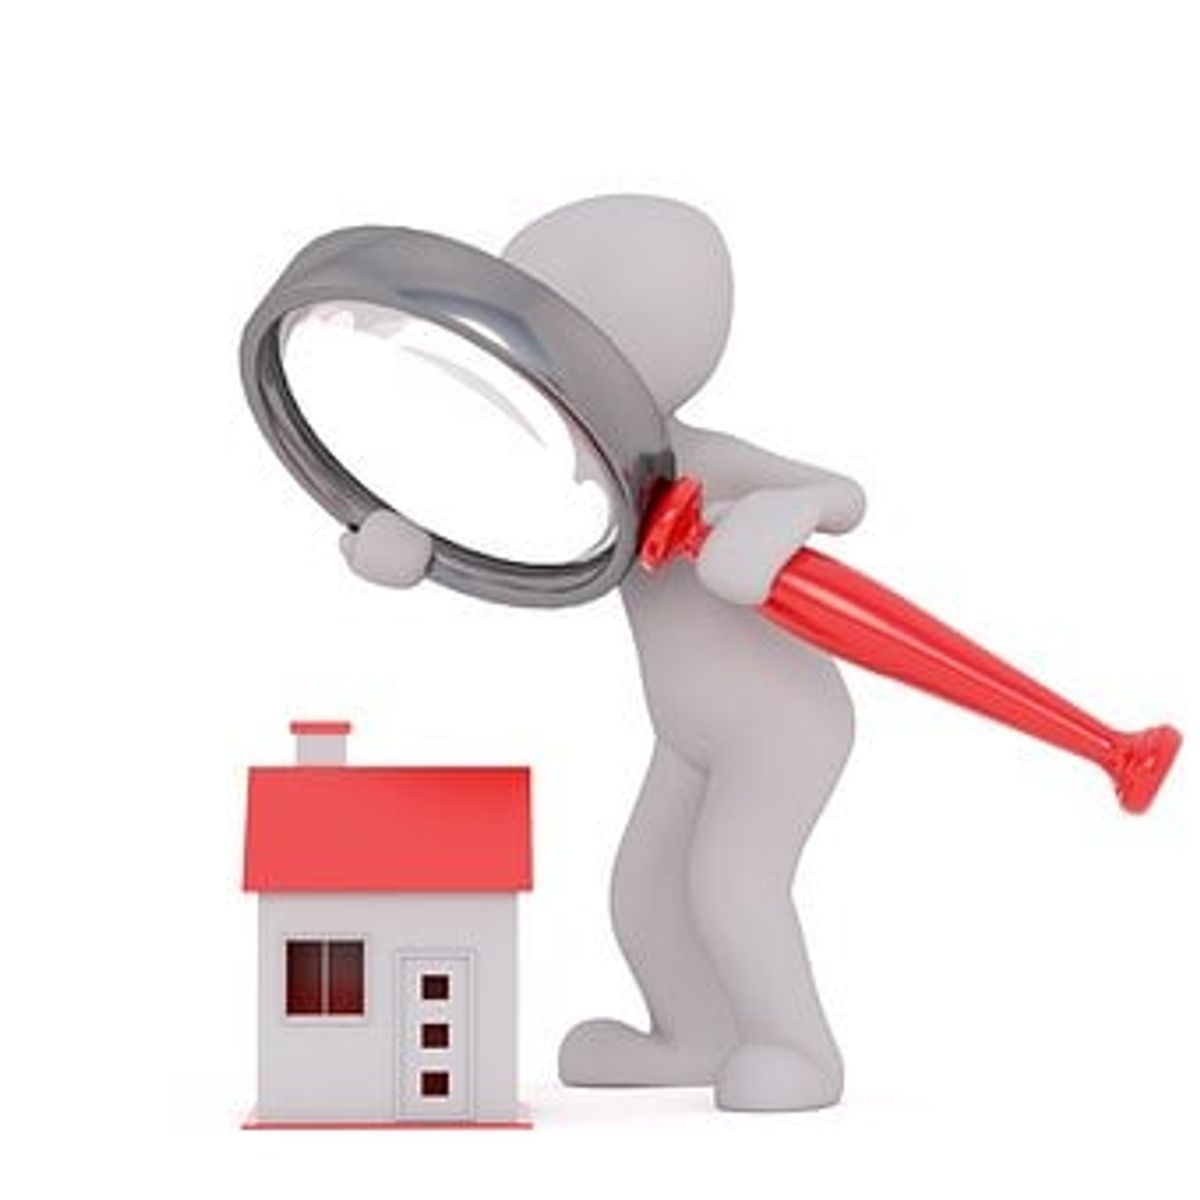 Home Inspections and Your Realtor